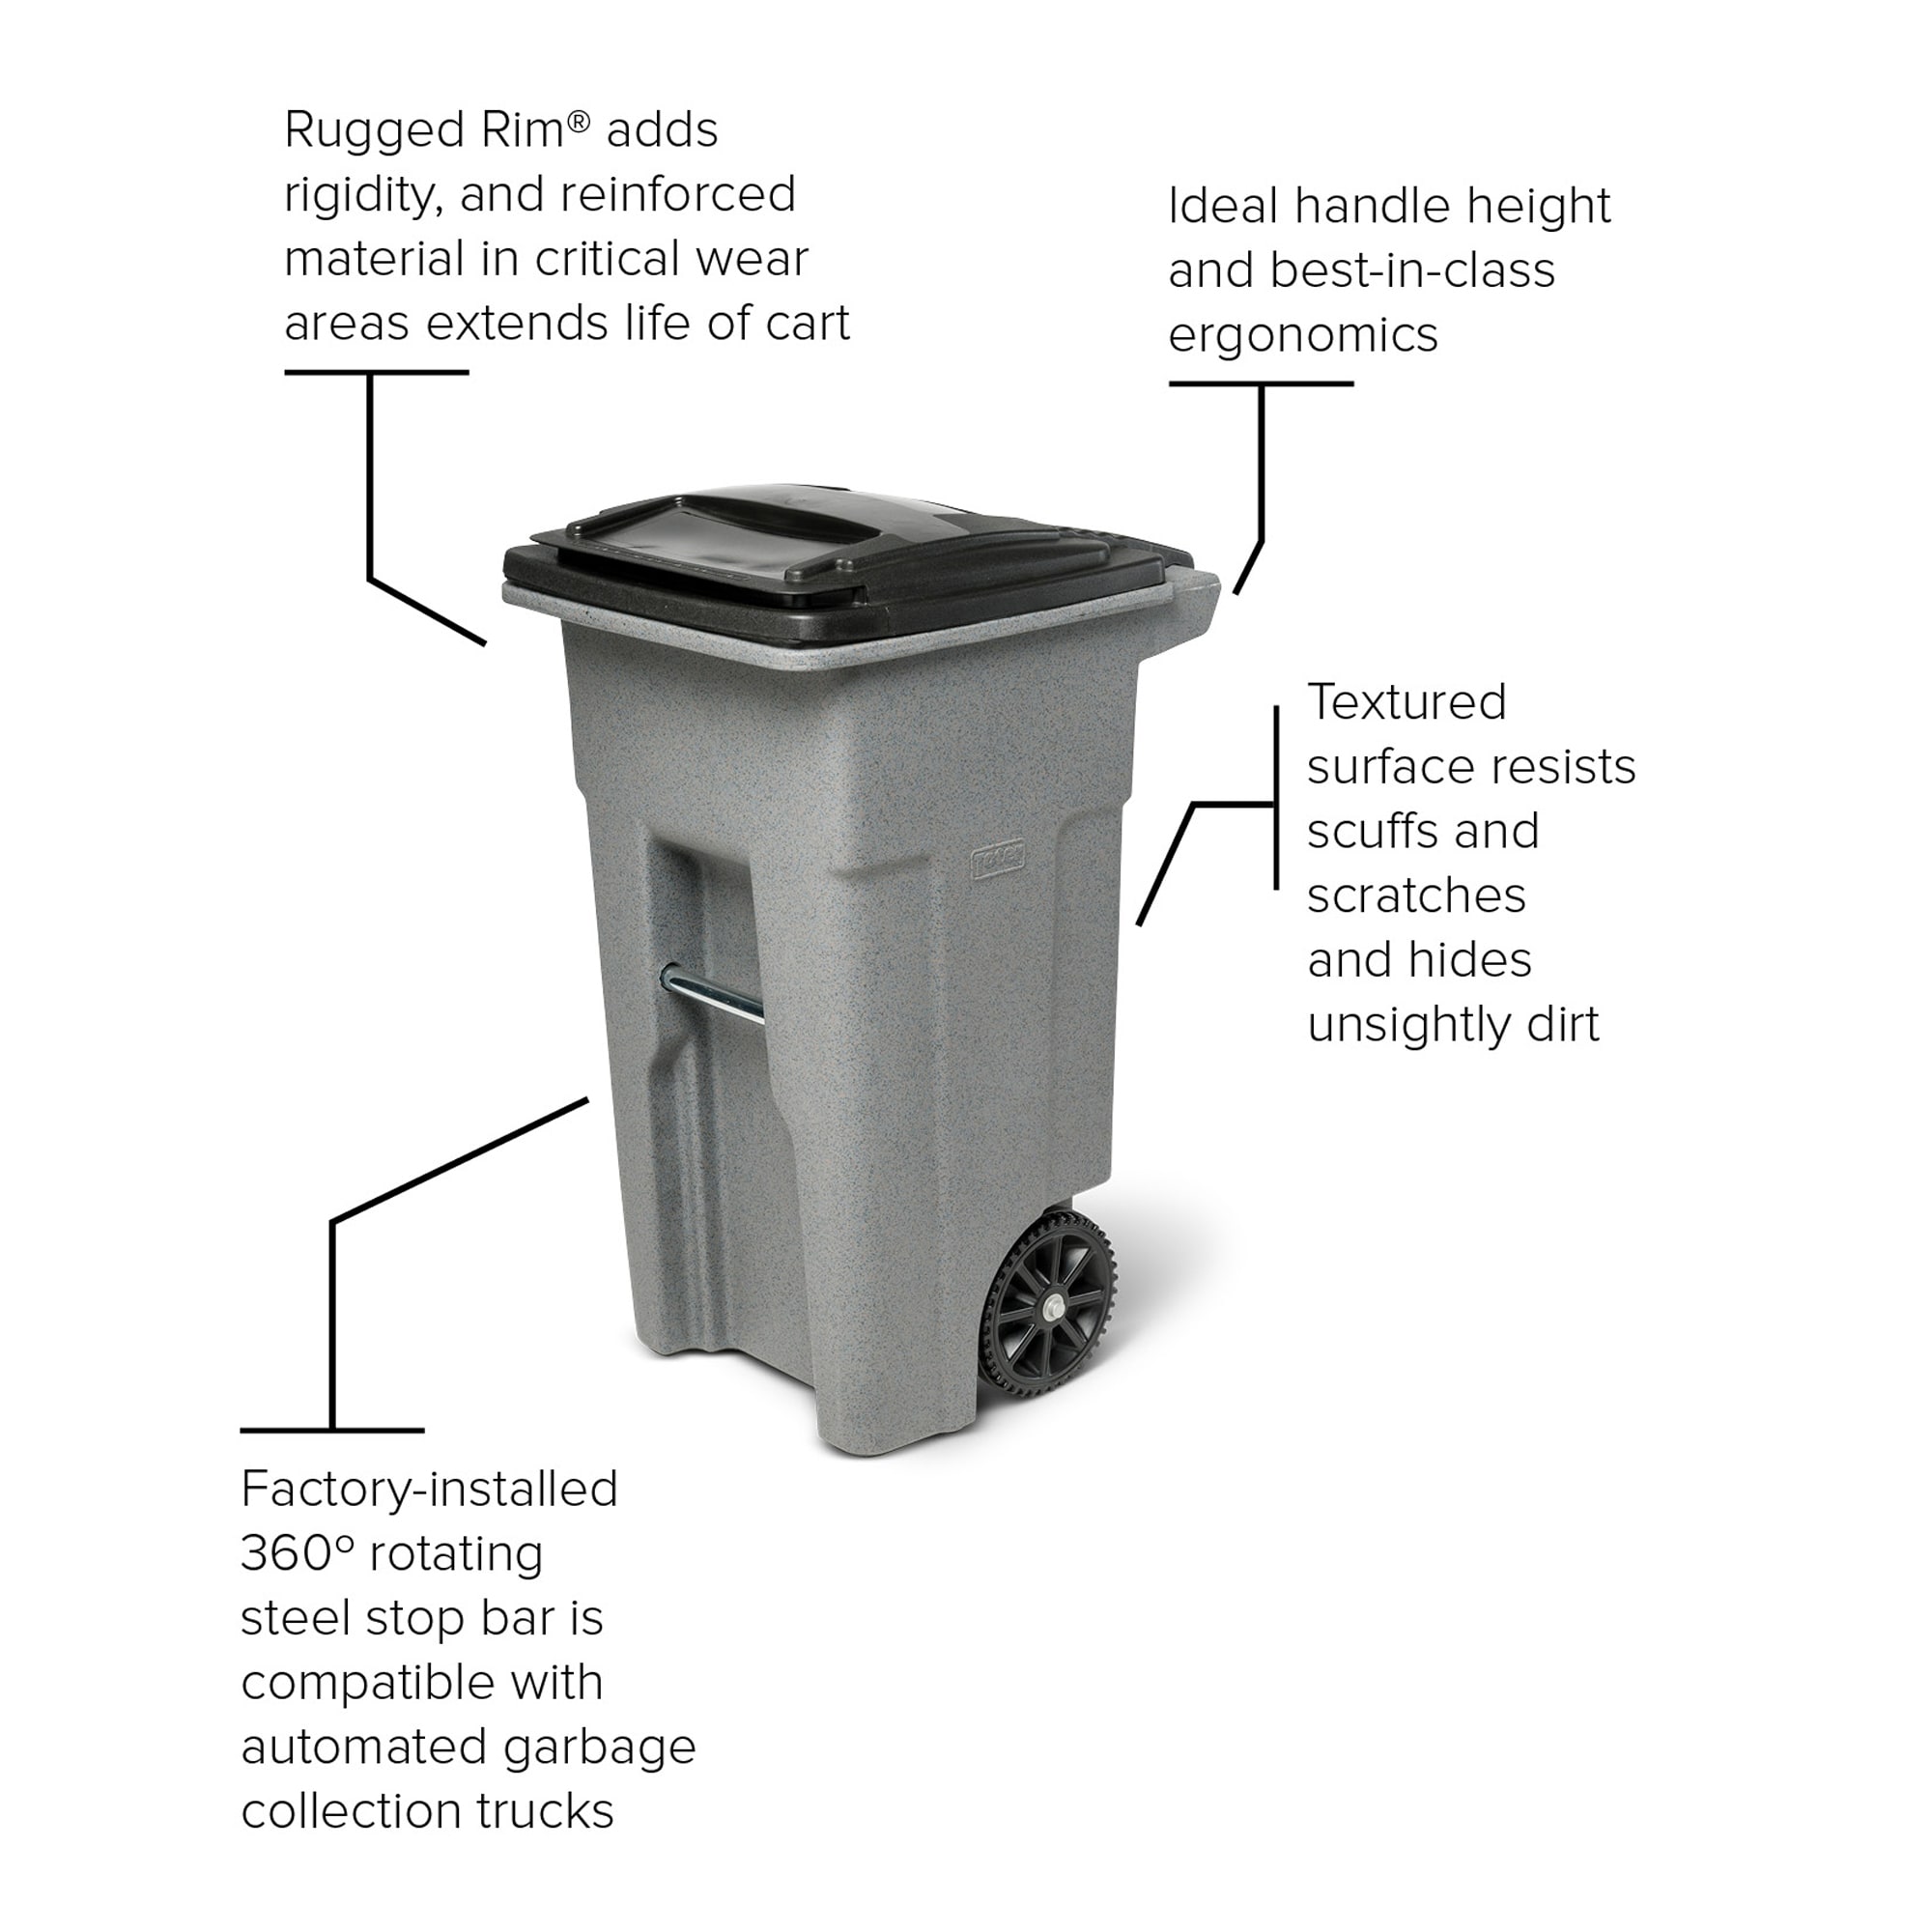 Project Source 32-Gallons Black Plastic Wheeled Trash Can with Lid Outdoor  in the Trash Cans department at